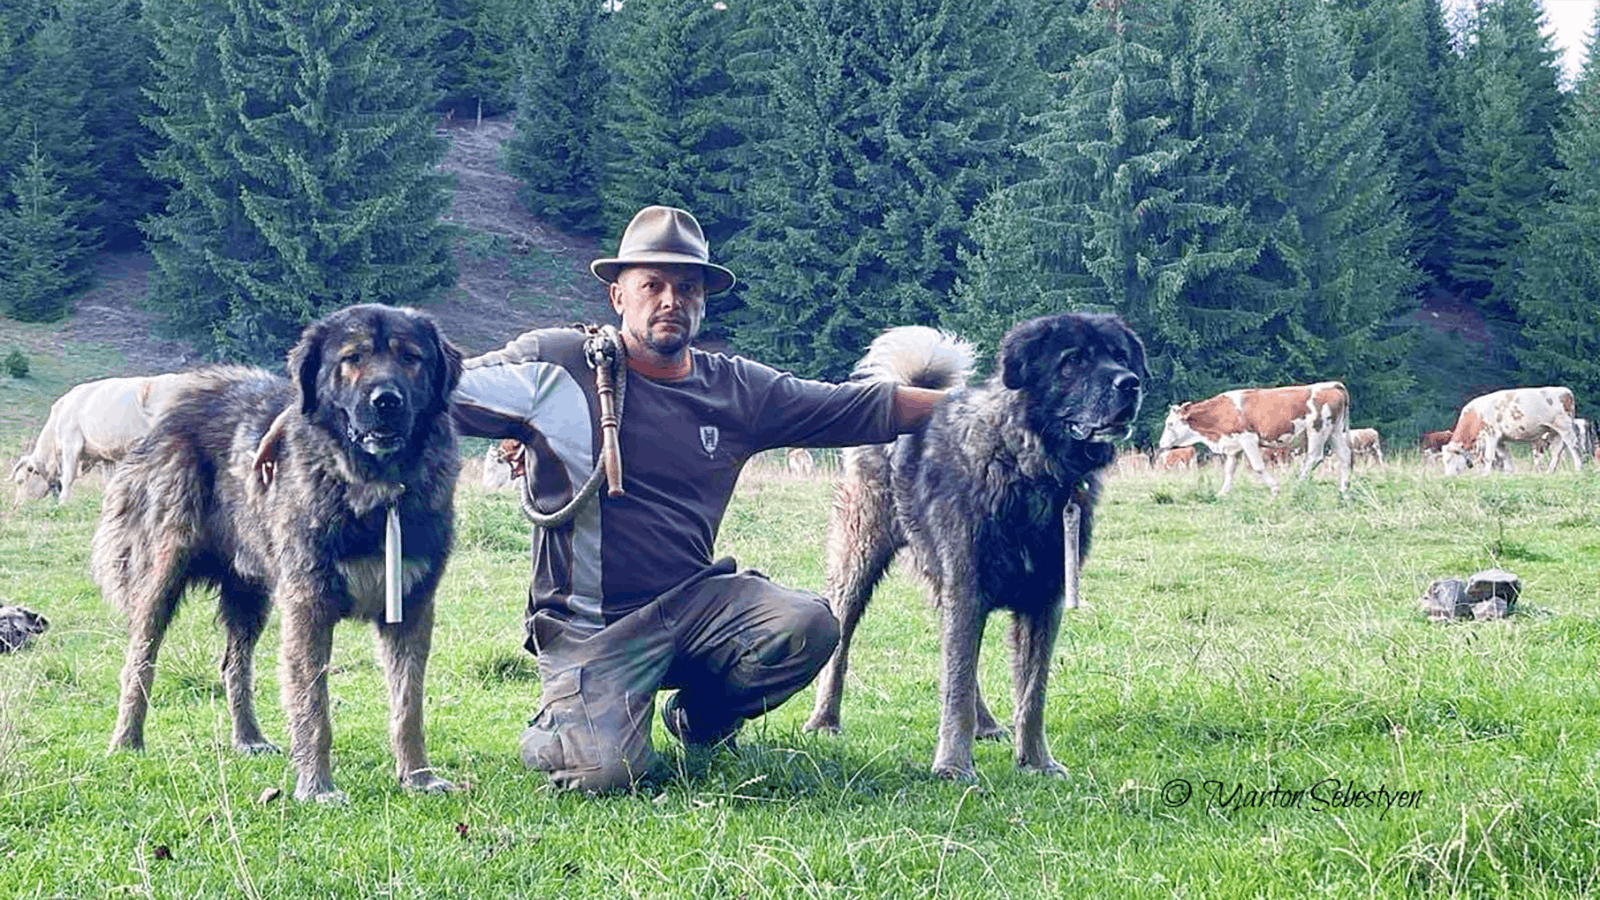 Marton Sebestyen ranches in Transylvania and Romania, and relies on guardian dogs to protect his livestock.